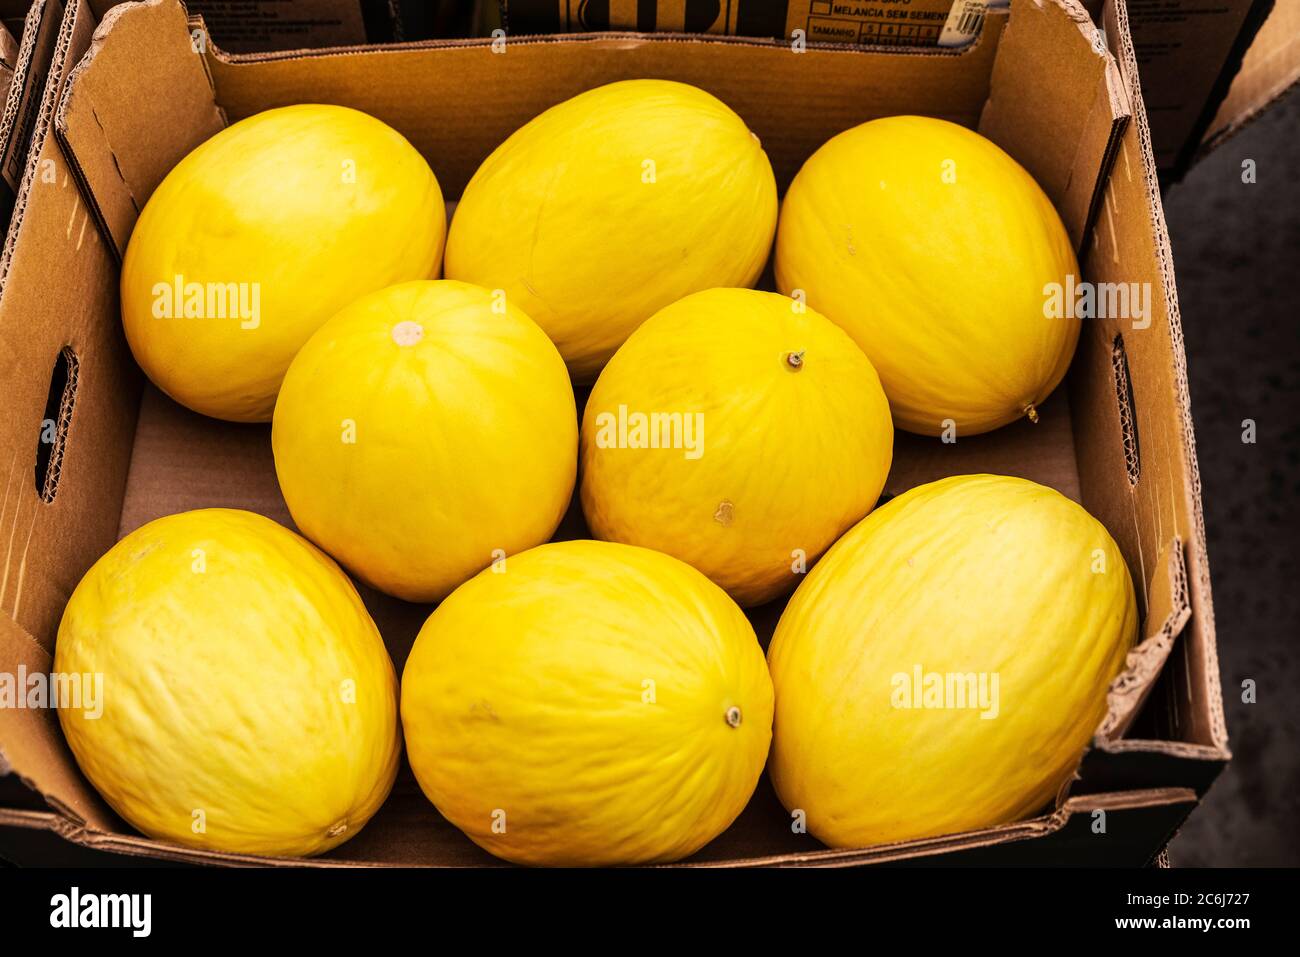 Cardboard box with yellow melons on a street in Dublin, Ireland Stock Photo